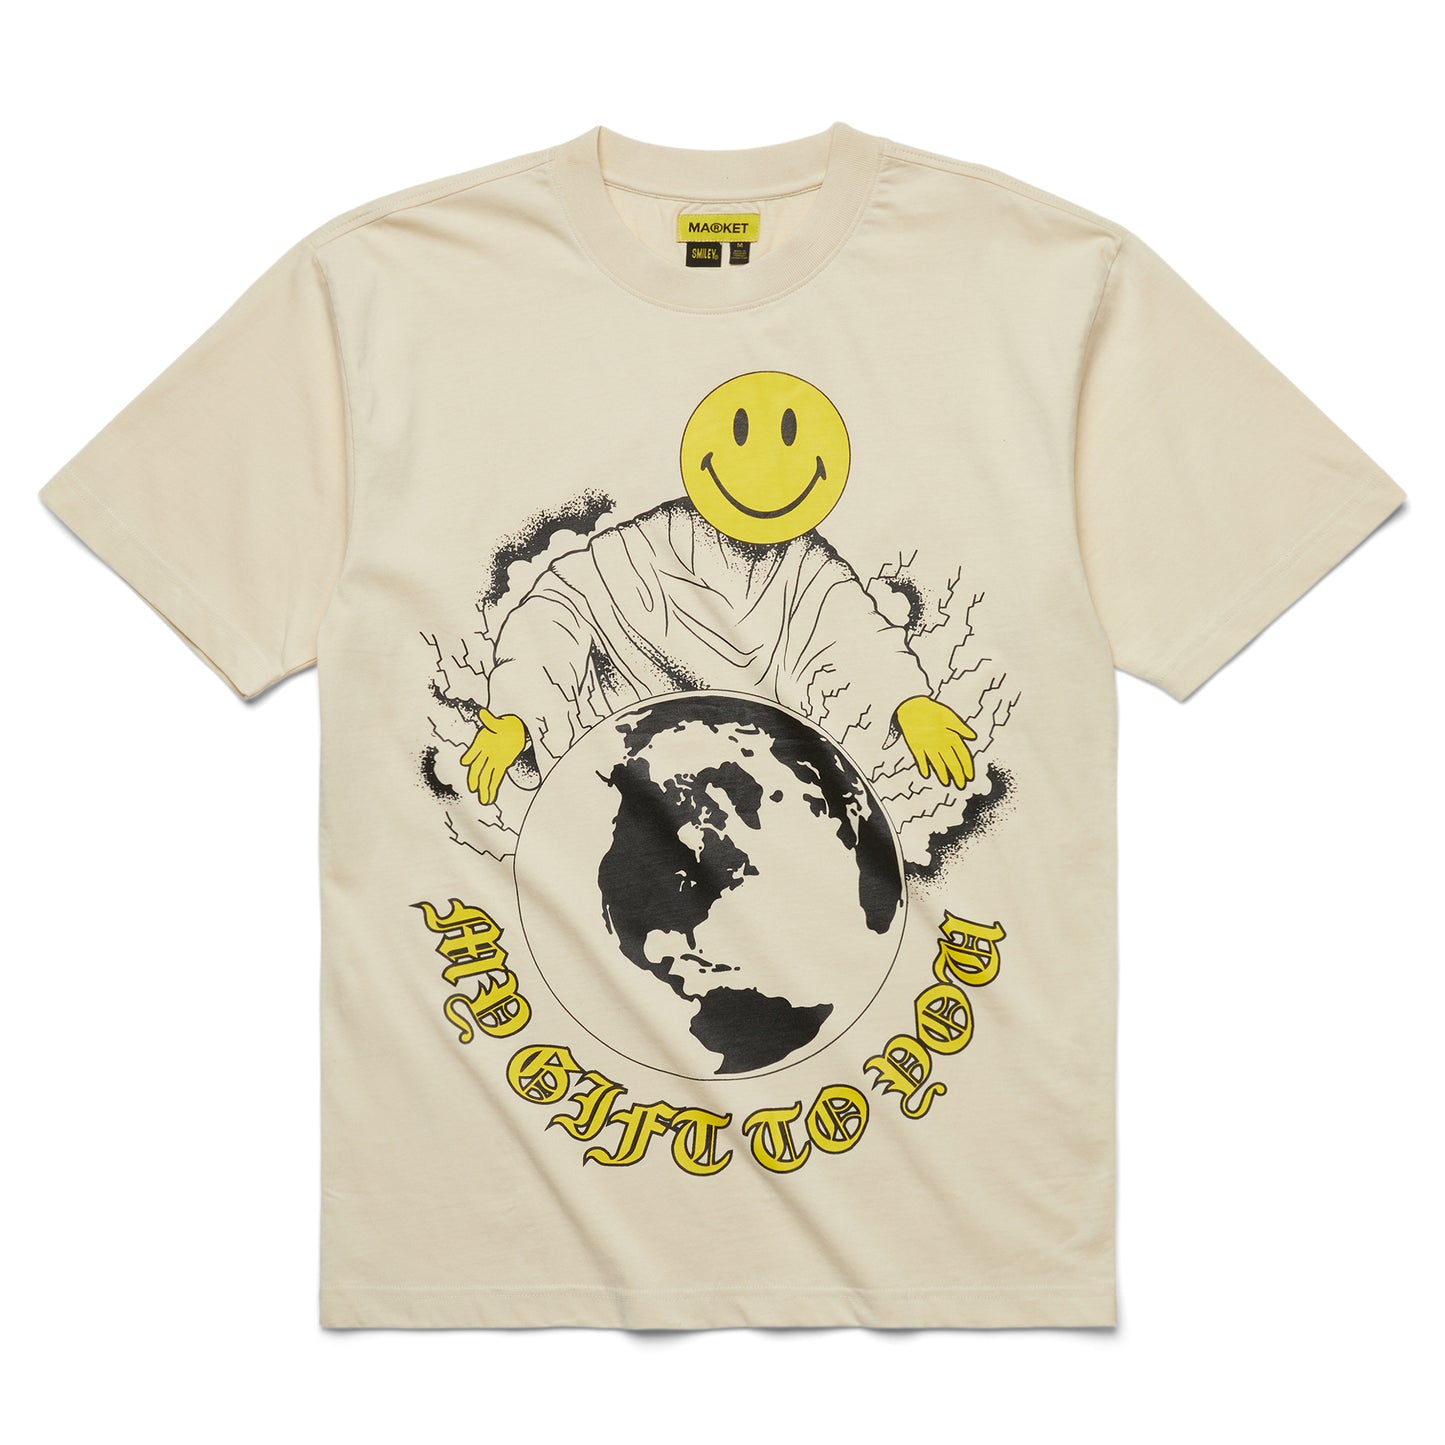 MARKET SMILEY ME GIFT TO YOU T-SHIRT - deviceone